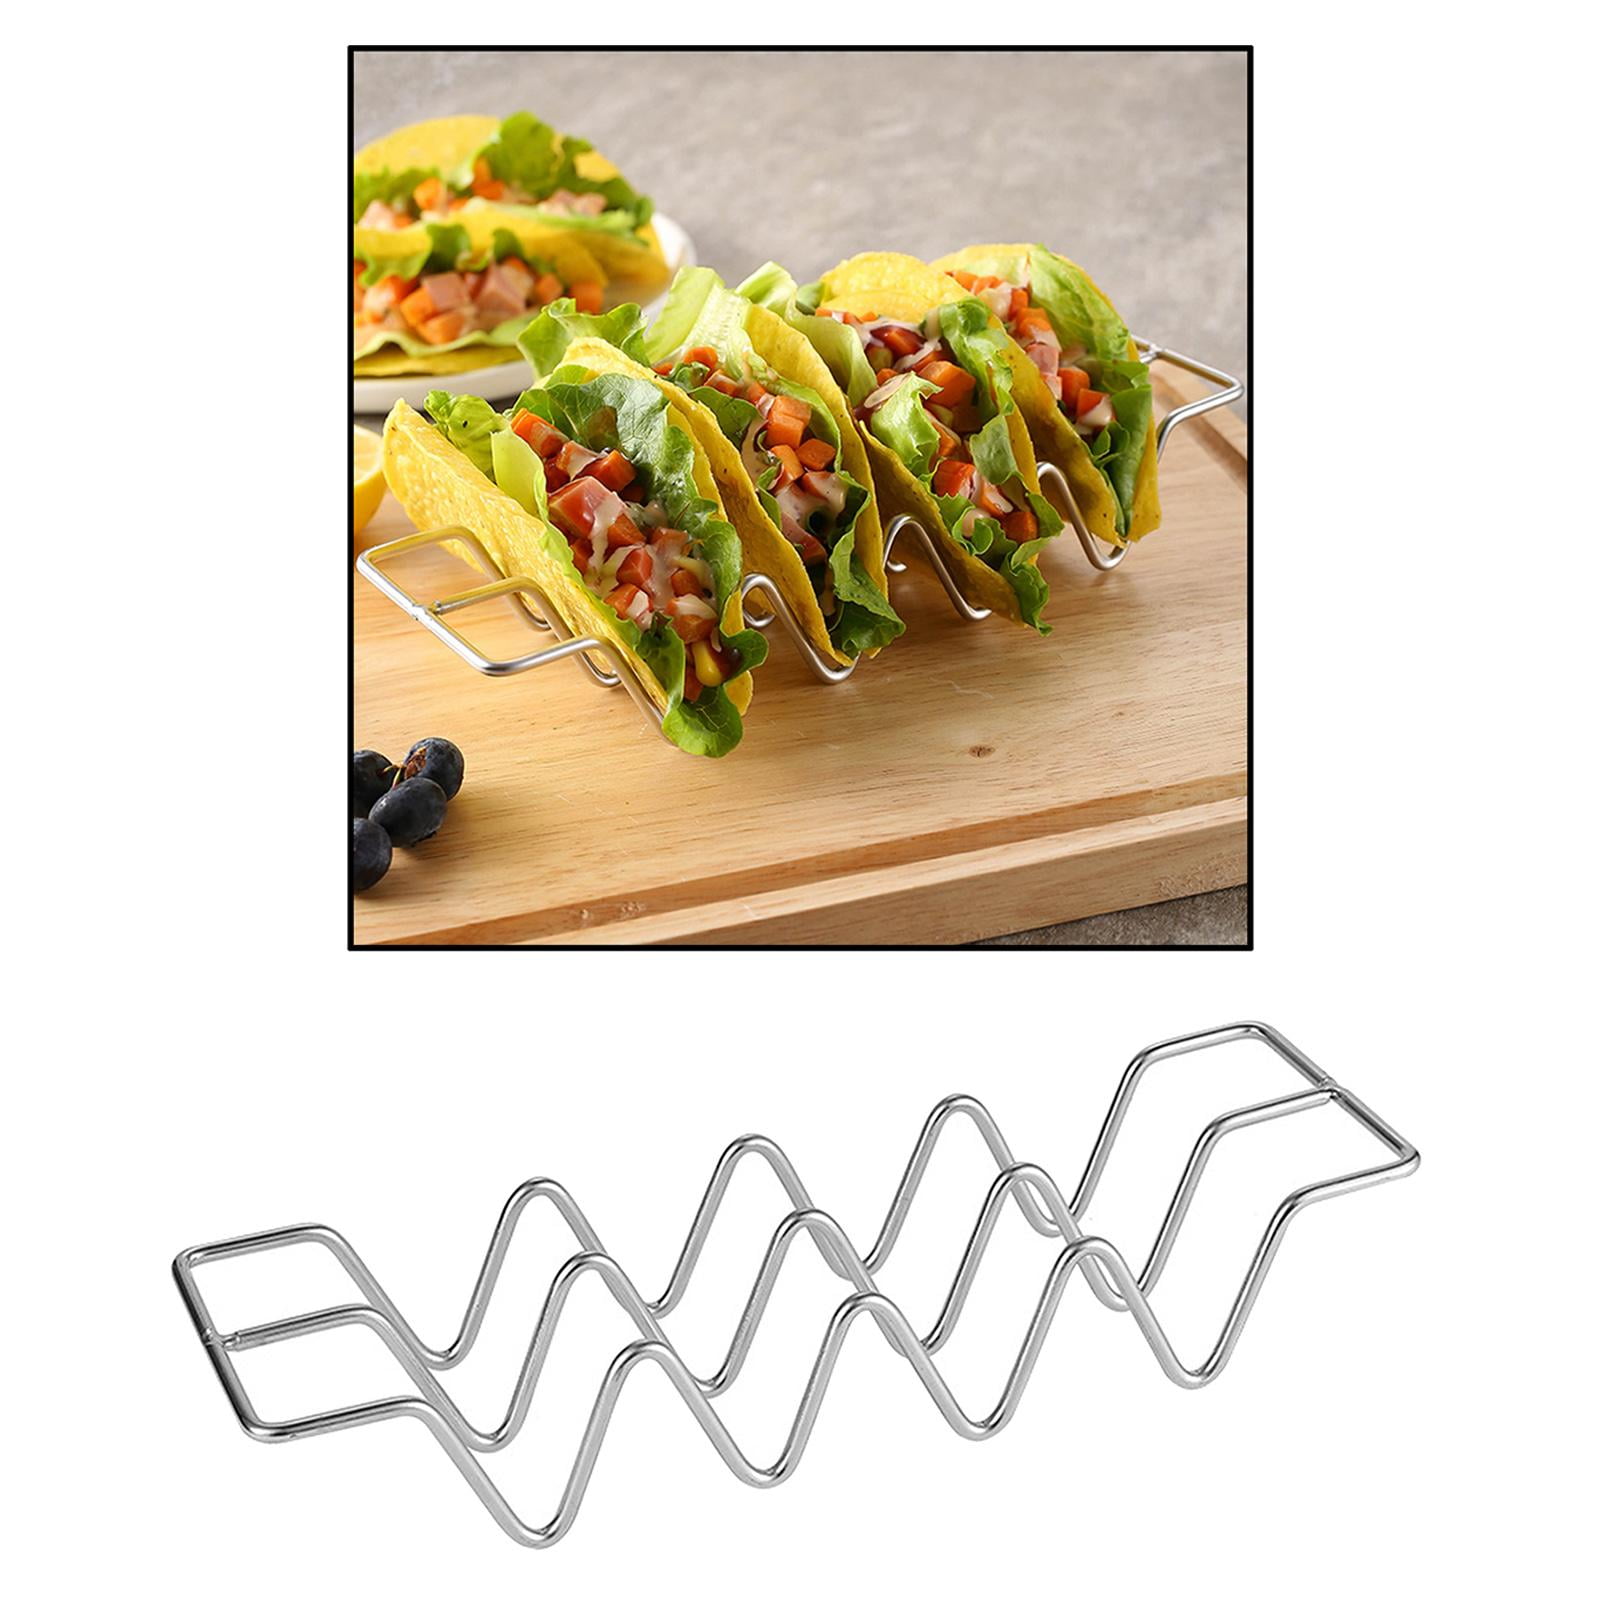 Stainless Steel Western-style Food Taco Holder Pancake Burrito Spring Rolls  Rack Baking Cooking Tool Kitchen Bakery Accessories - AliExpress